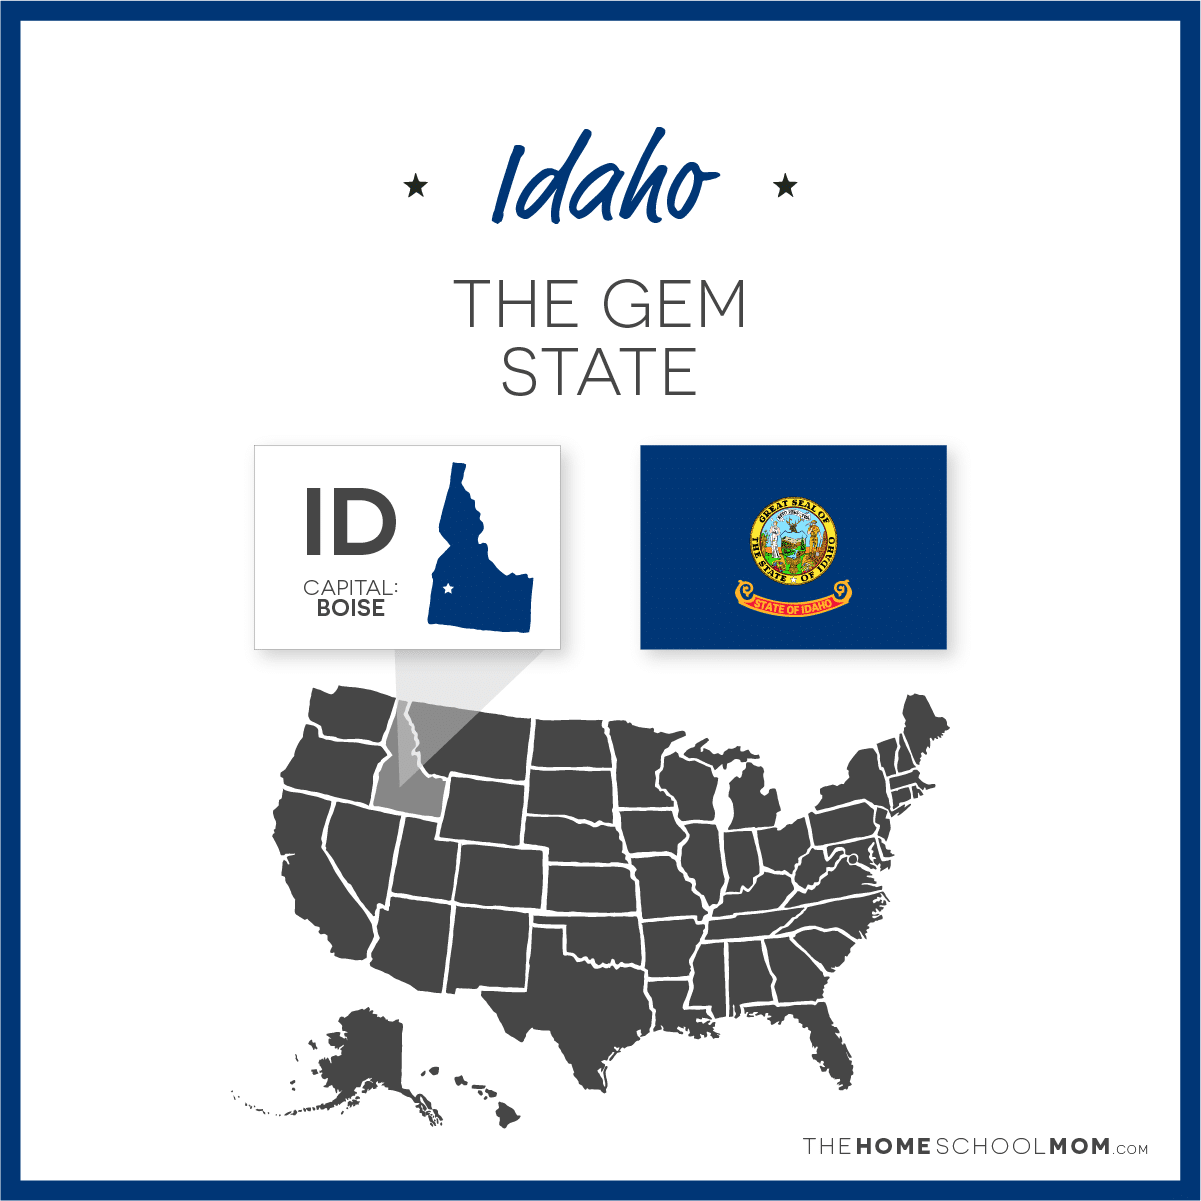 Map of US with Idaho highlighted and text Idaho - The Gem State; capital – Boise